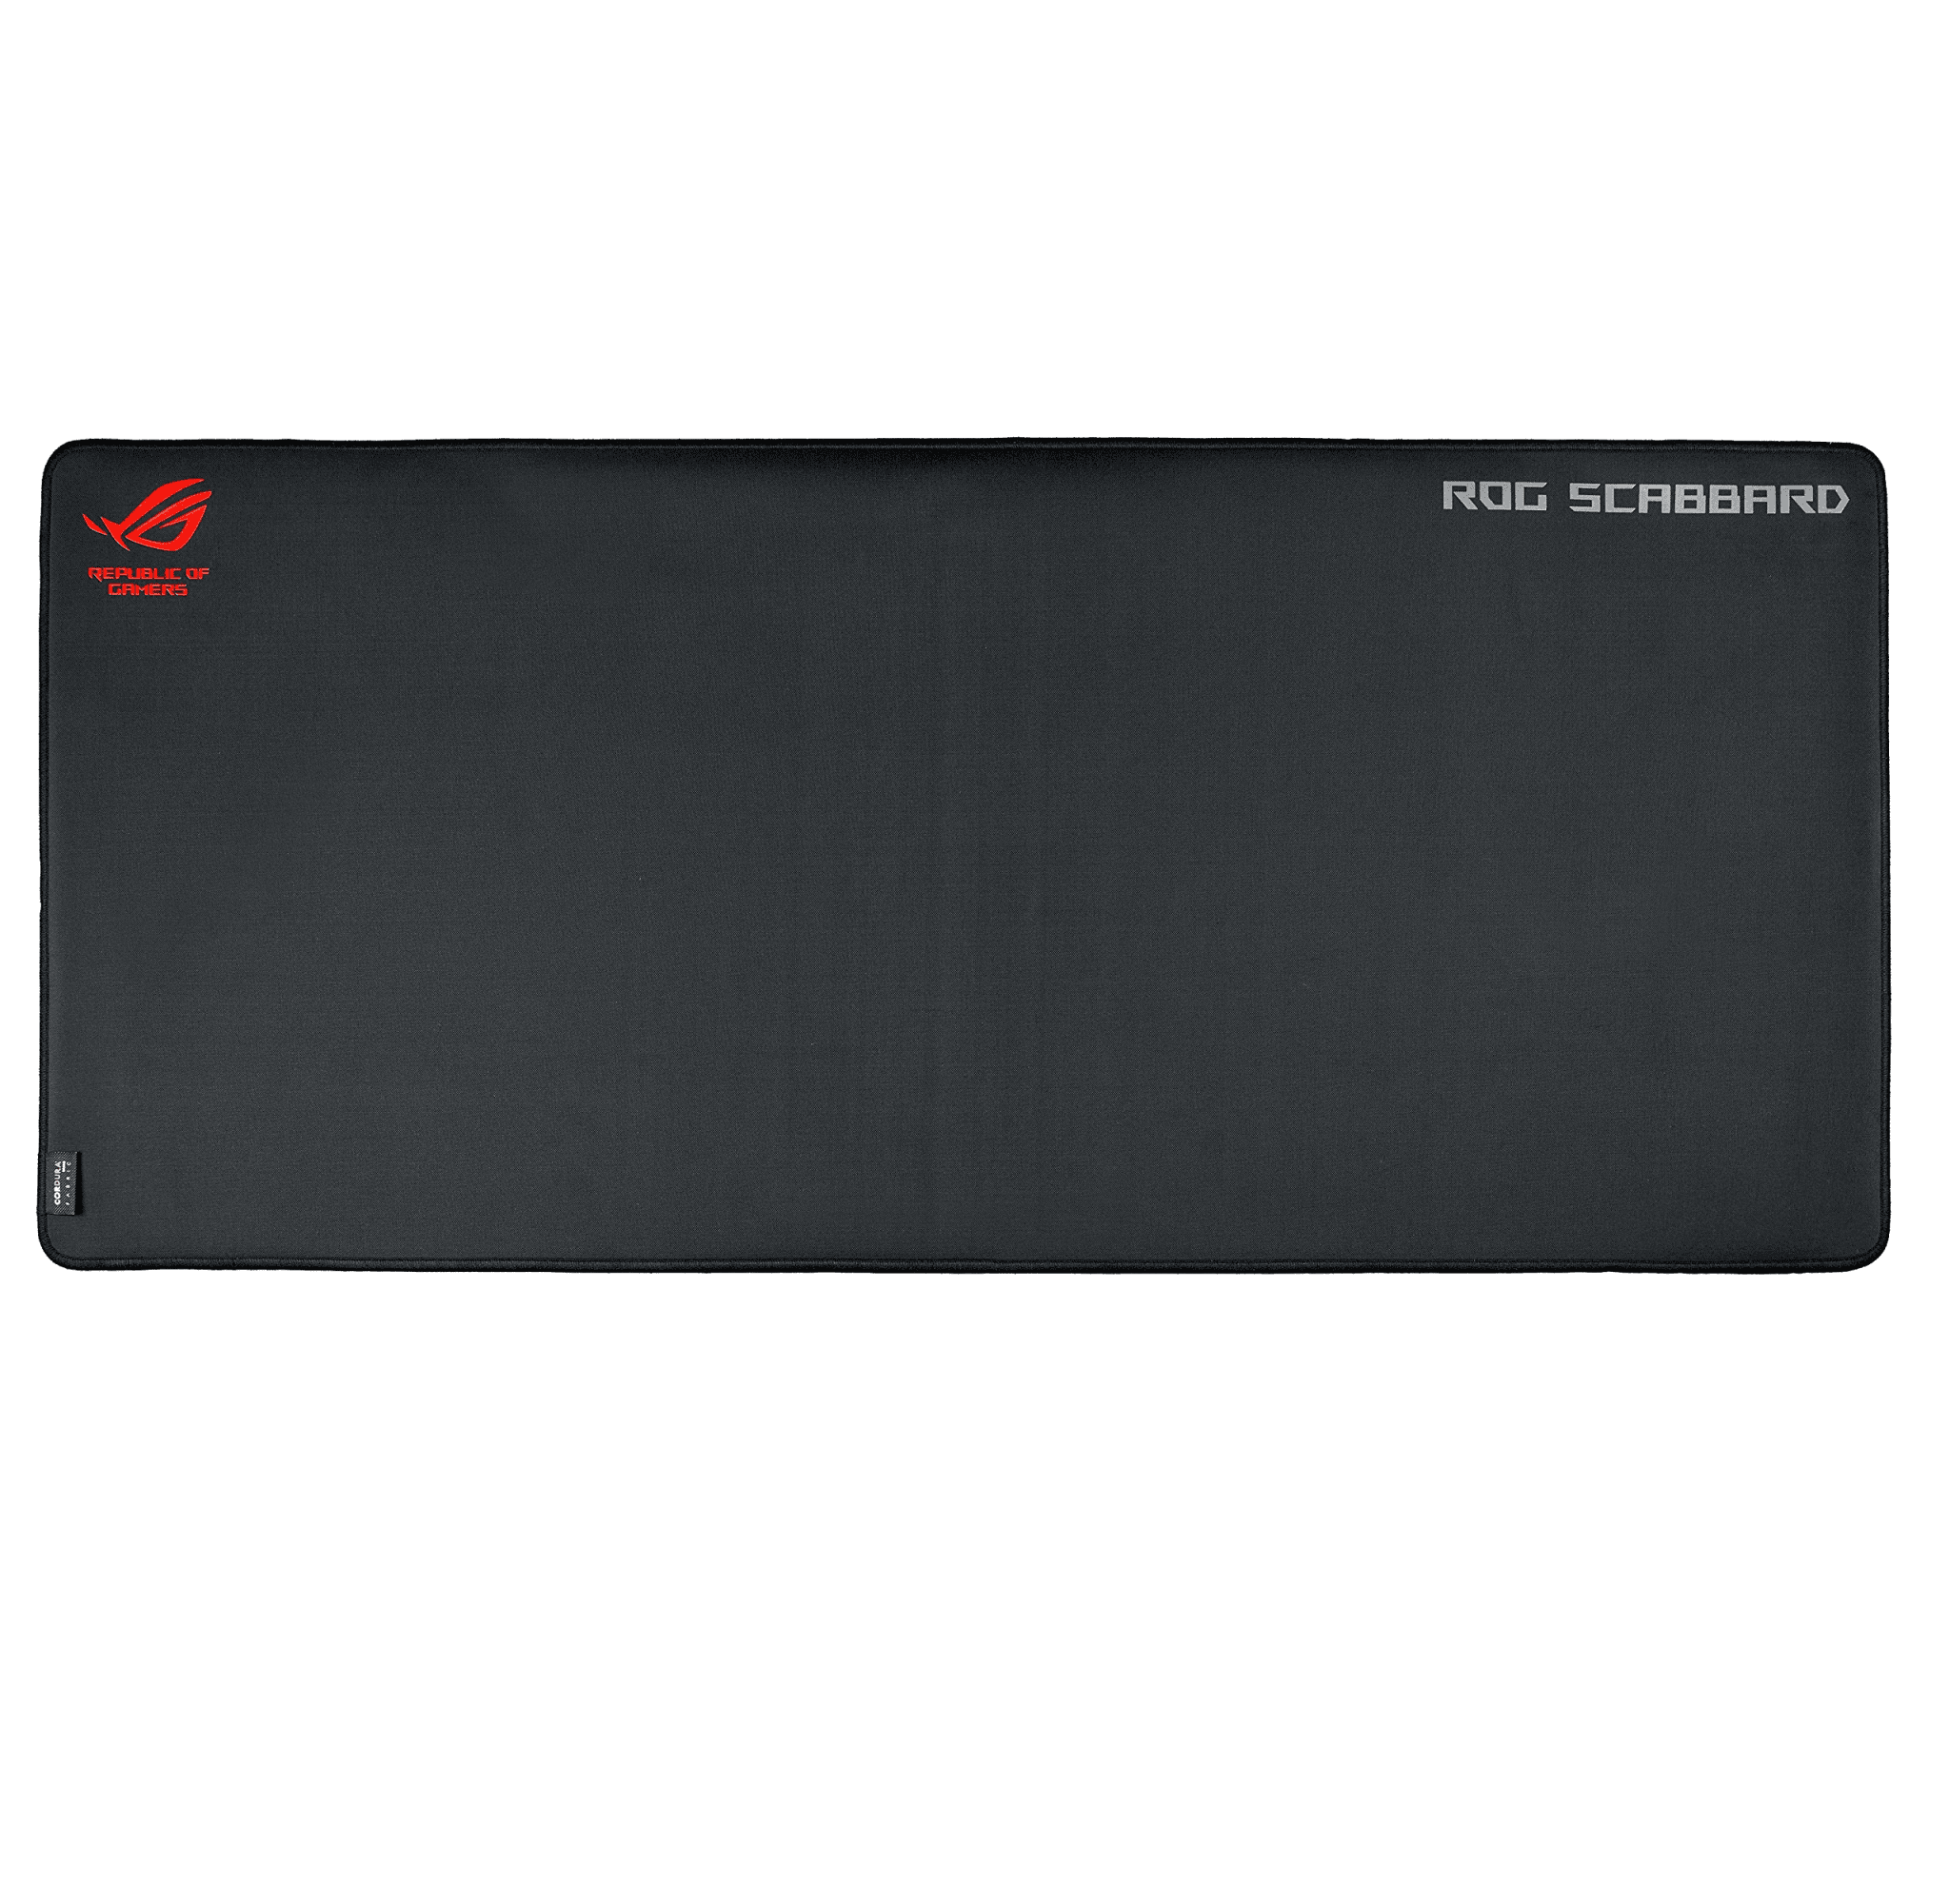 Asus ROG Scabbard Extended Gaming Mouse Pad - Store 974 | ستور ٩٧٤